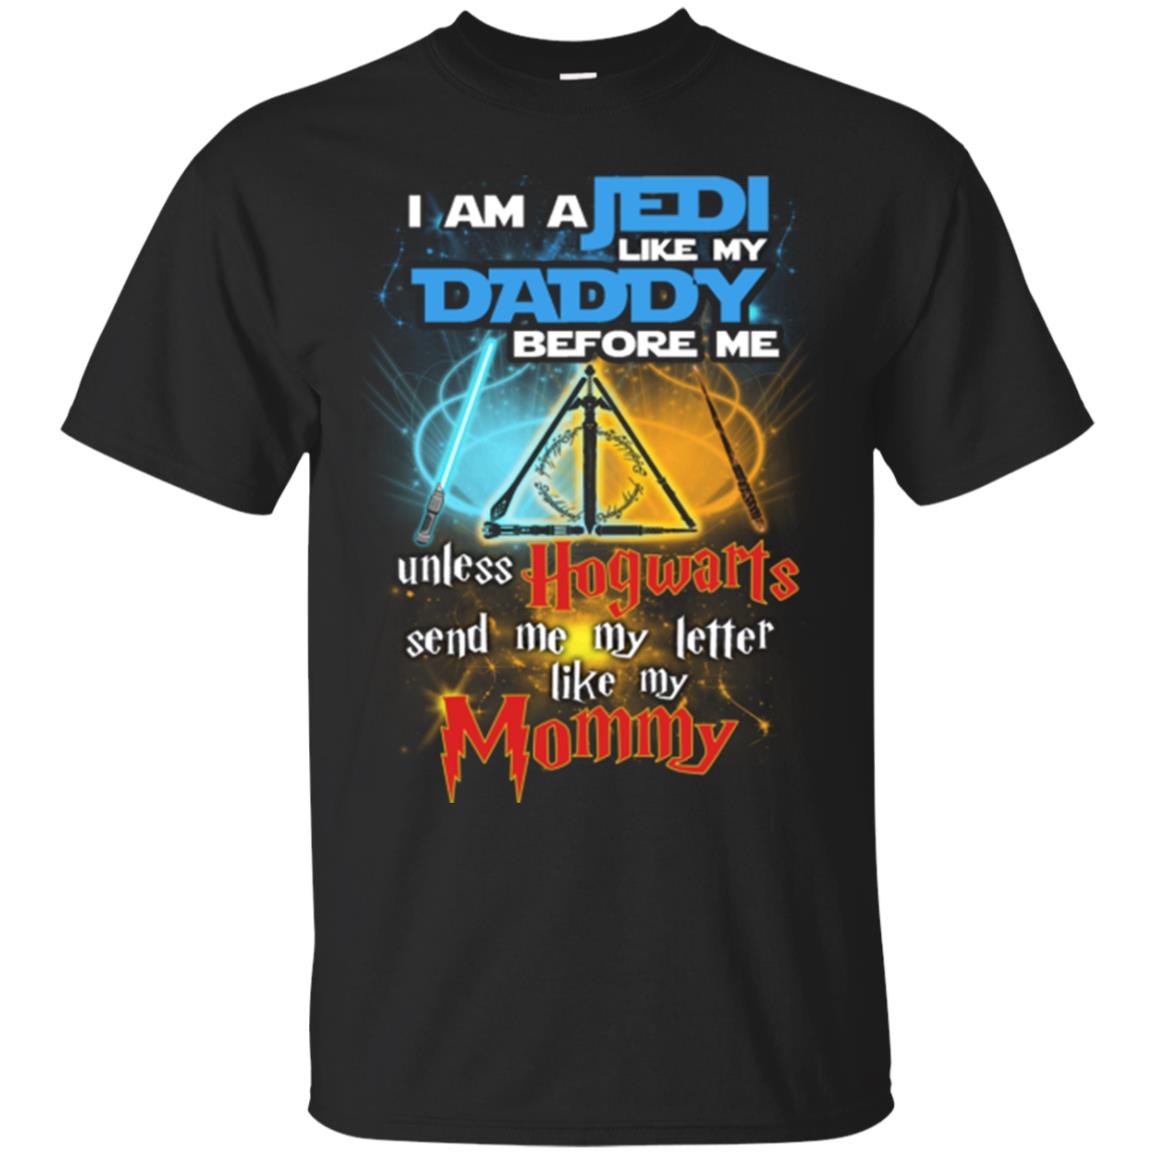 I Am A Jedi Like My Daddy Before Me Unless Hogwarts Send Me My Letter Like My Mommy Funny Hary Potter Fan T-shirtG200 Gildan Ultra Cotton T-Shirt